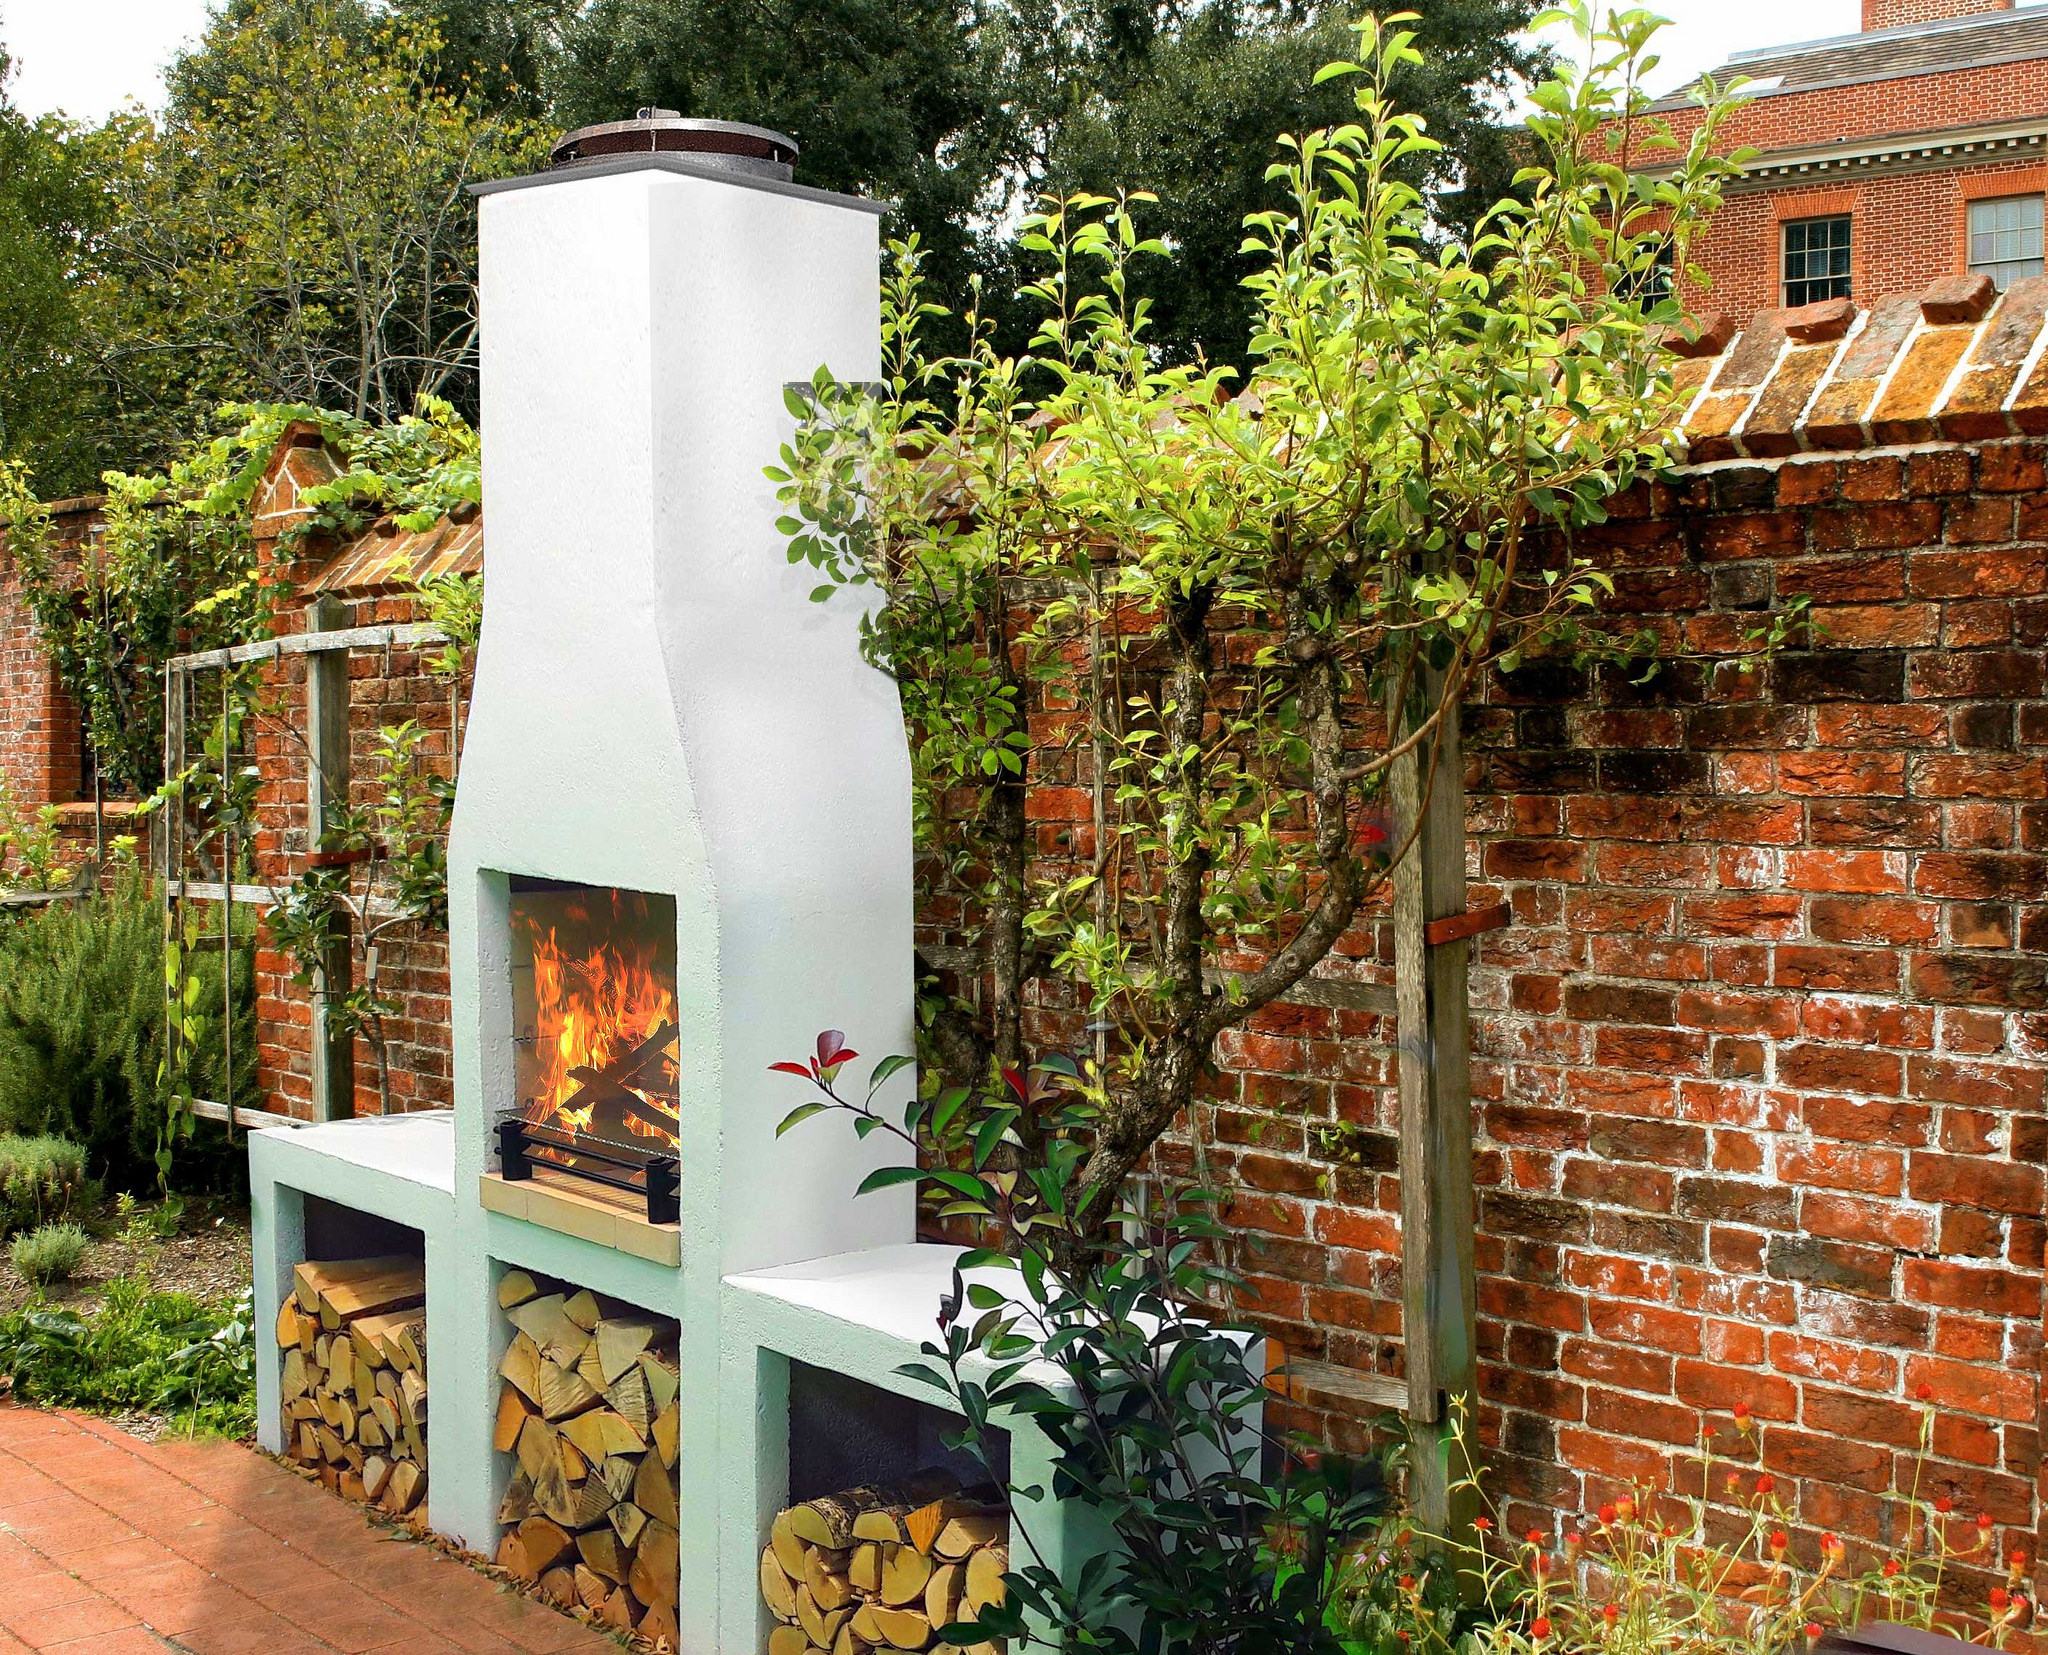 Designs for outdoor living – win a Garden Fireplace with Schiedel Chimney Systems @SchiedelUK